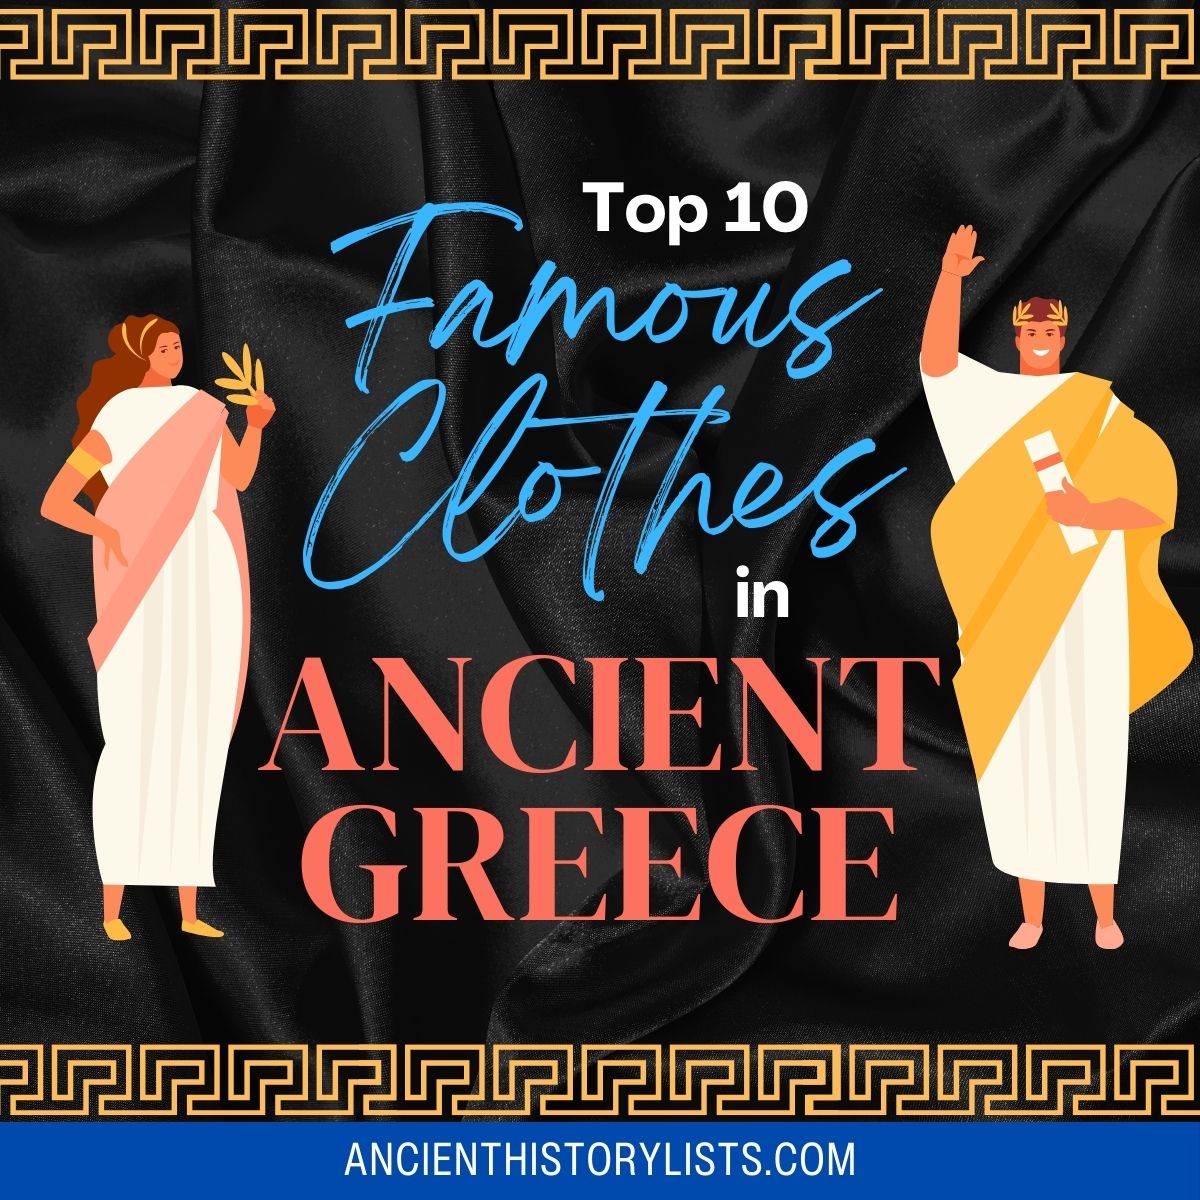 Famous Clothes in Ancient Greece